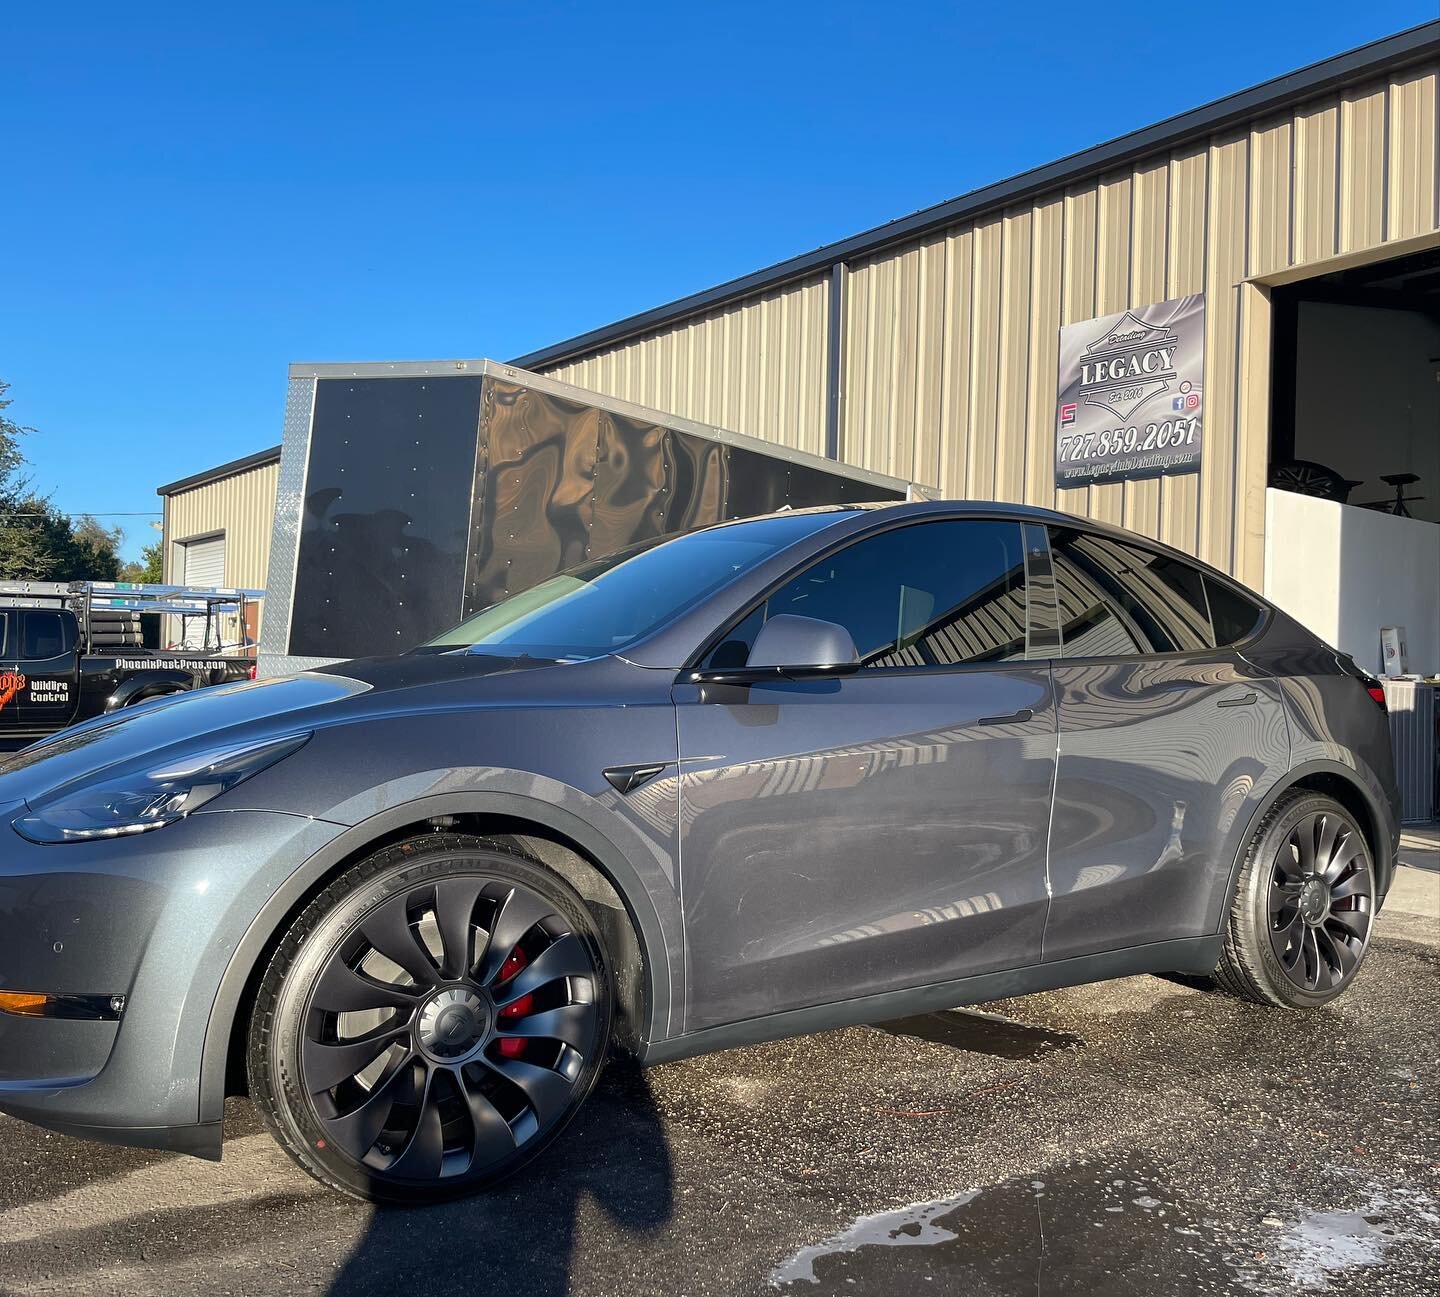 2022 Tesla Model Y received our Paint Correction and 5 year Ceramic coating Plus the windshield was coated along with the wheel faces!